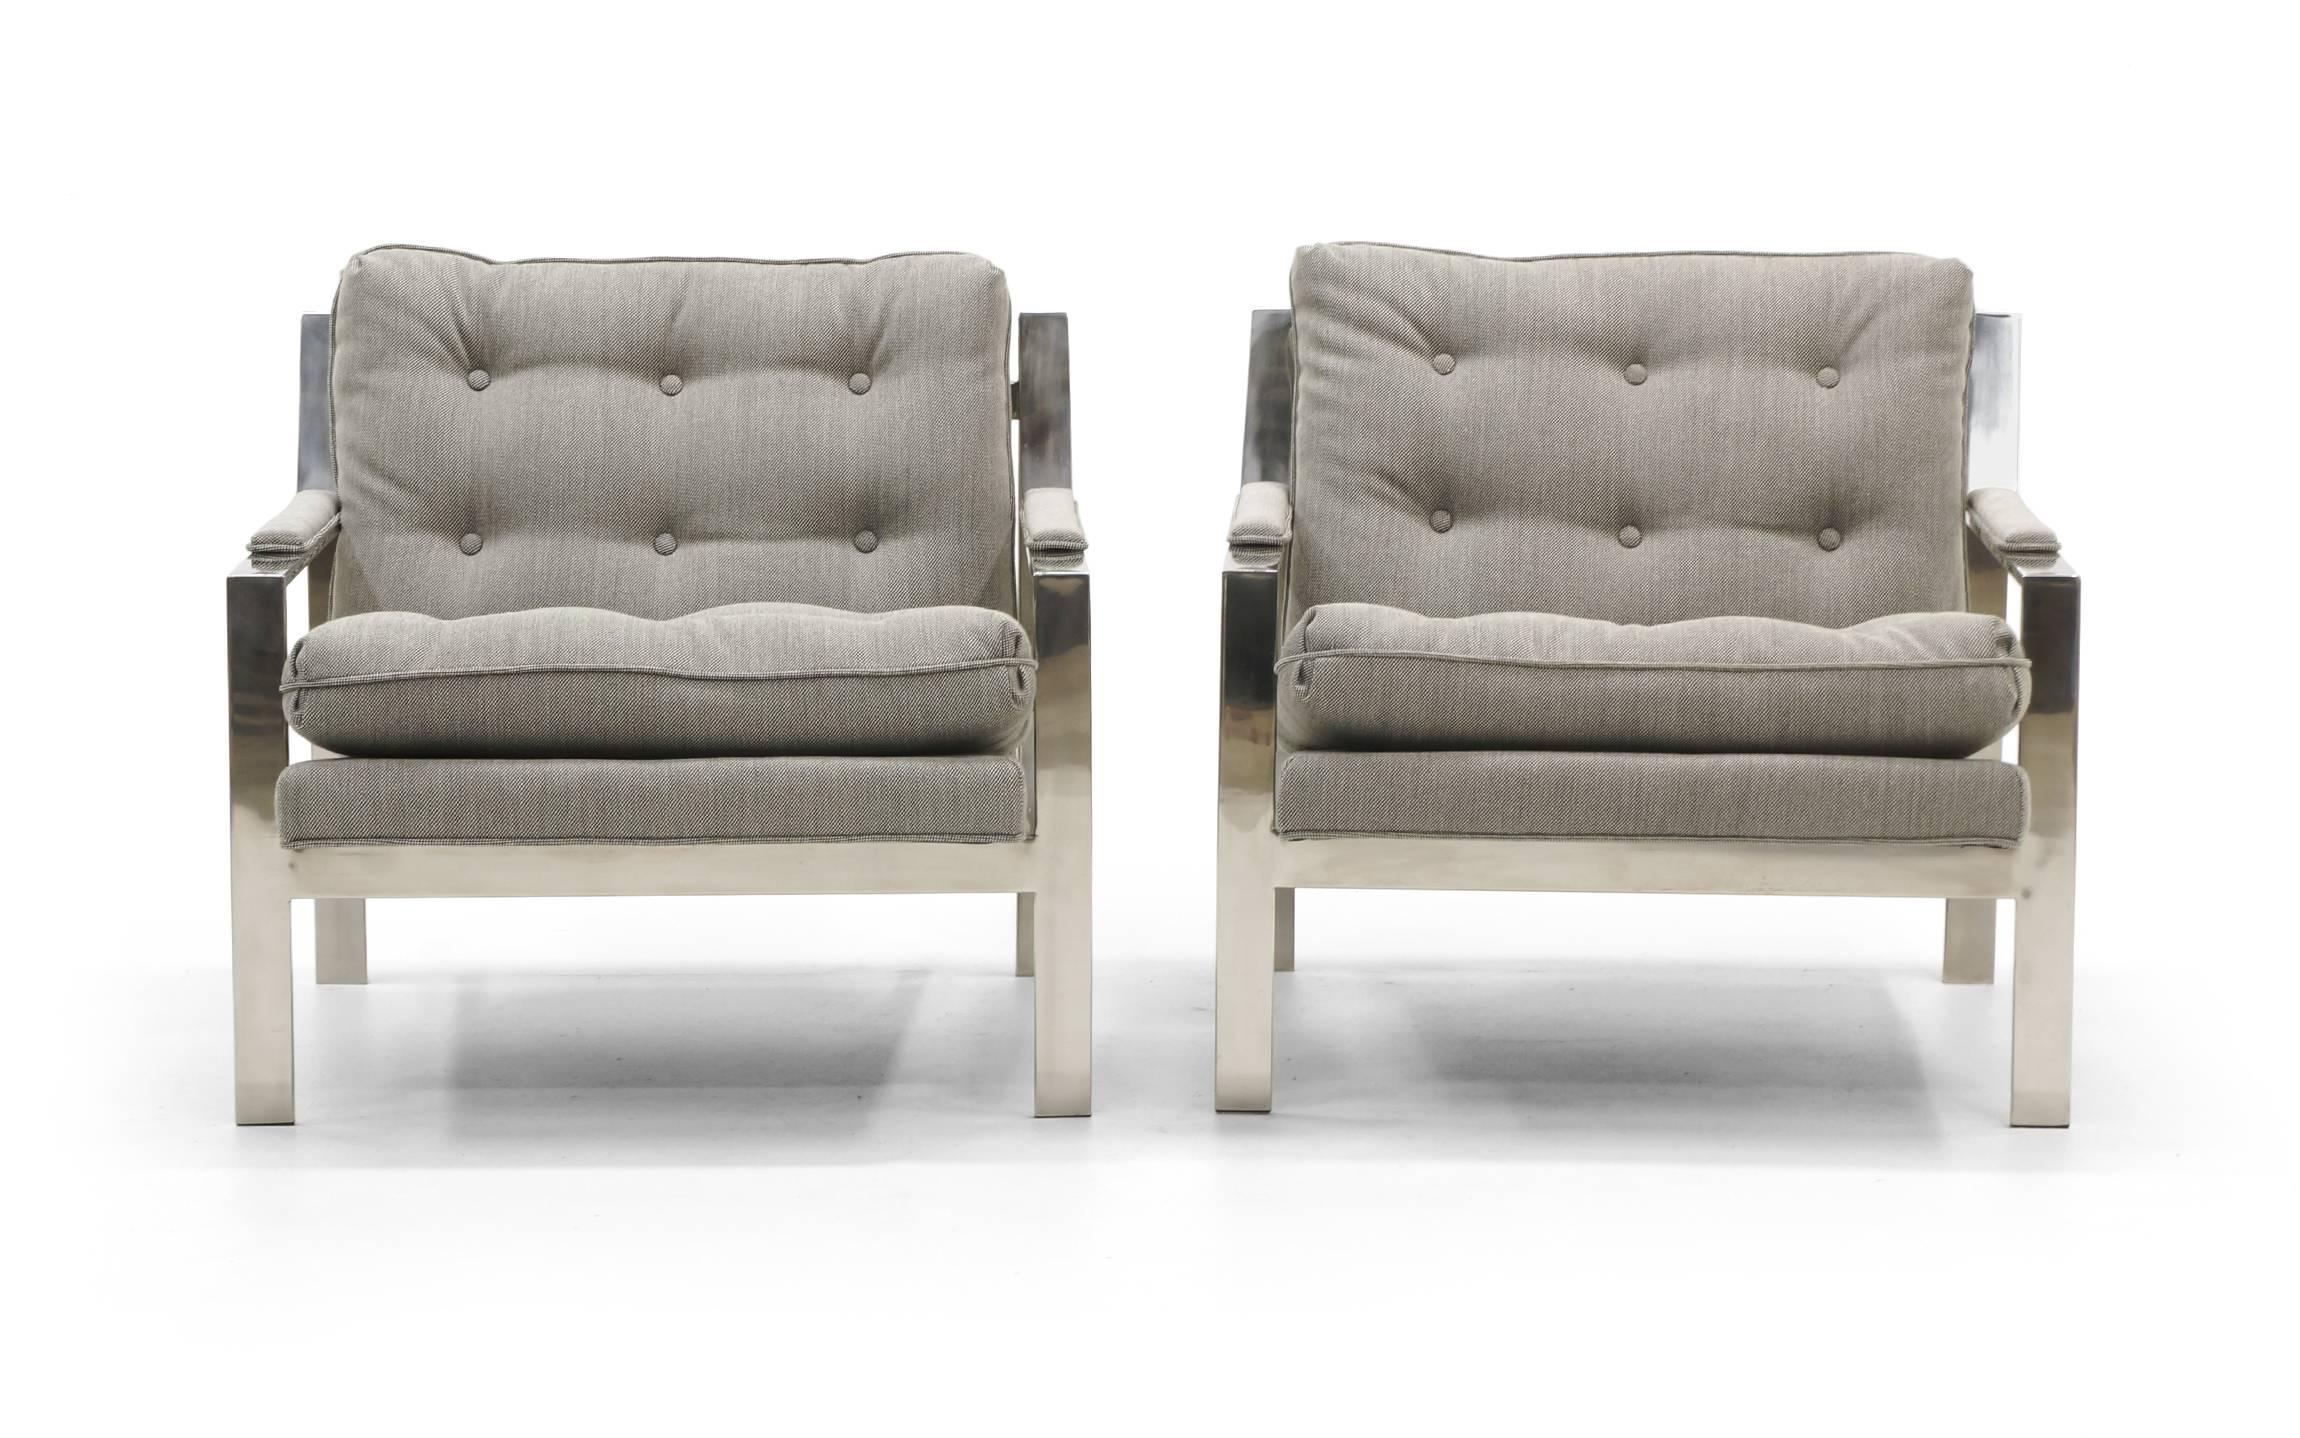 Pair of chrome framed lounge chairs designed by Cy Mann. These have been authentically and expertly restored and reupholstered in black and white Maharam Remix fabric with makes the chairs appear a light gray / grey. Also see our listing for a